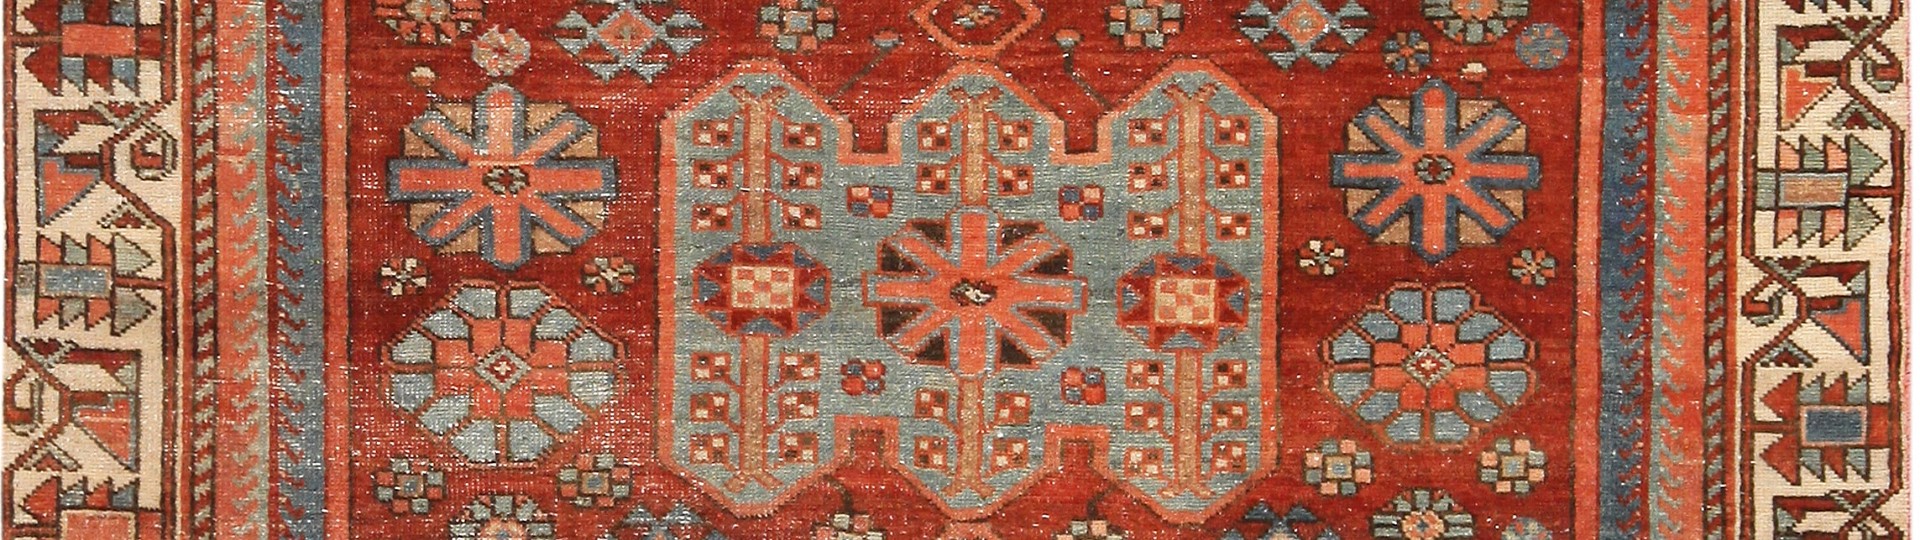 The Rug Revival: Timed Auction of Exquisite Antique and Vintage Pieces by Nazmiyal Auction